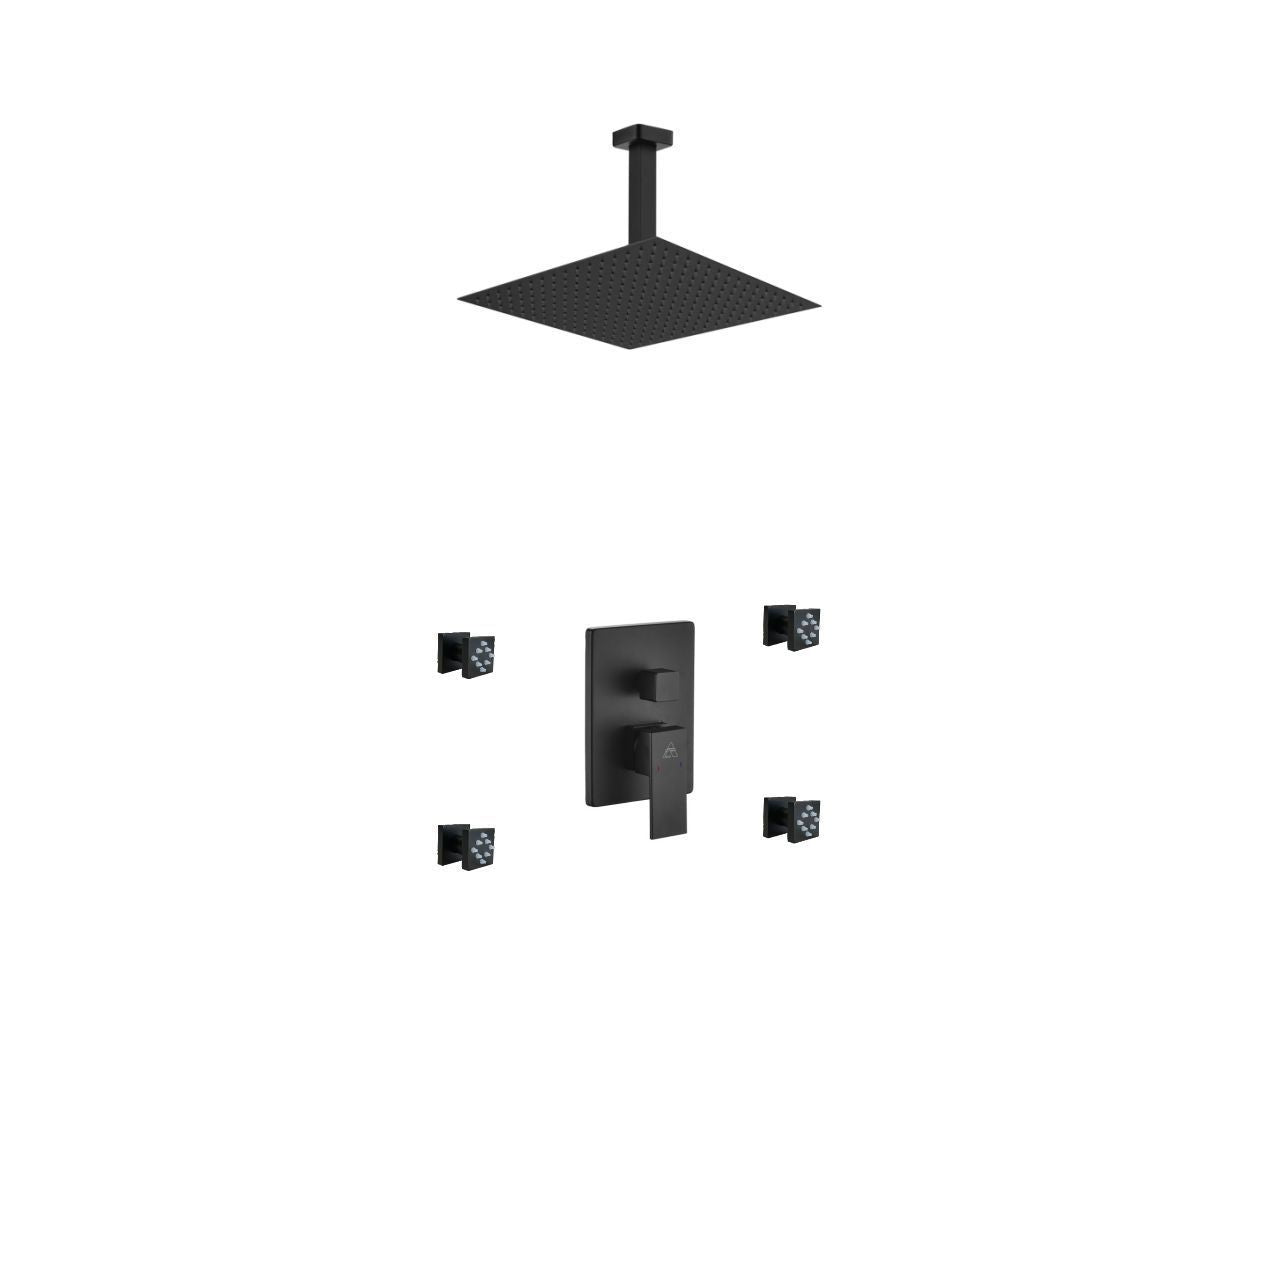 Kube Bath Aqua Piazza Black Shower Set With 12" Ceiling Mount Square Rain Shower and 4 Body Jets